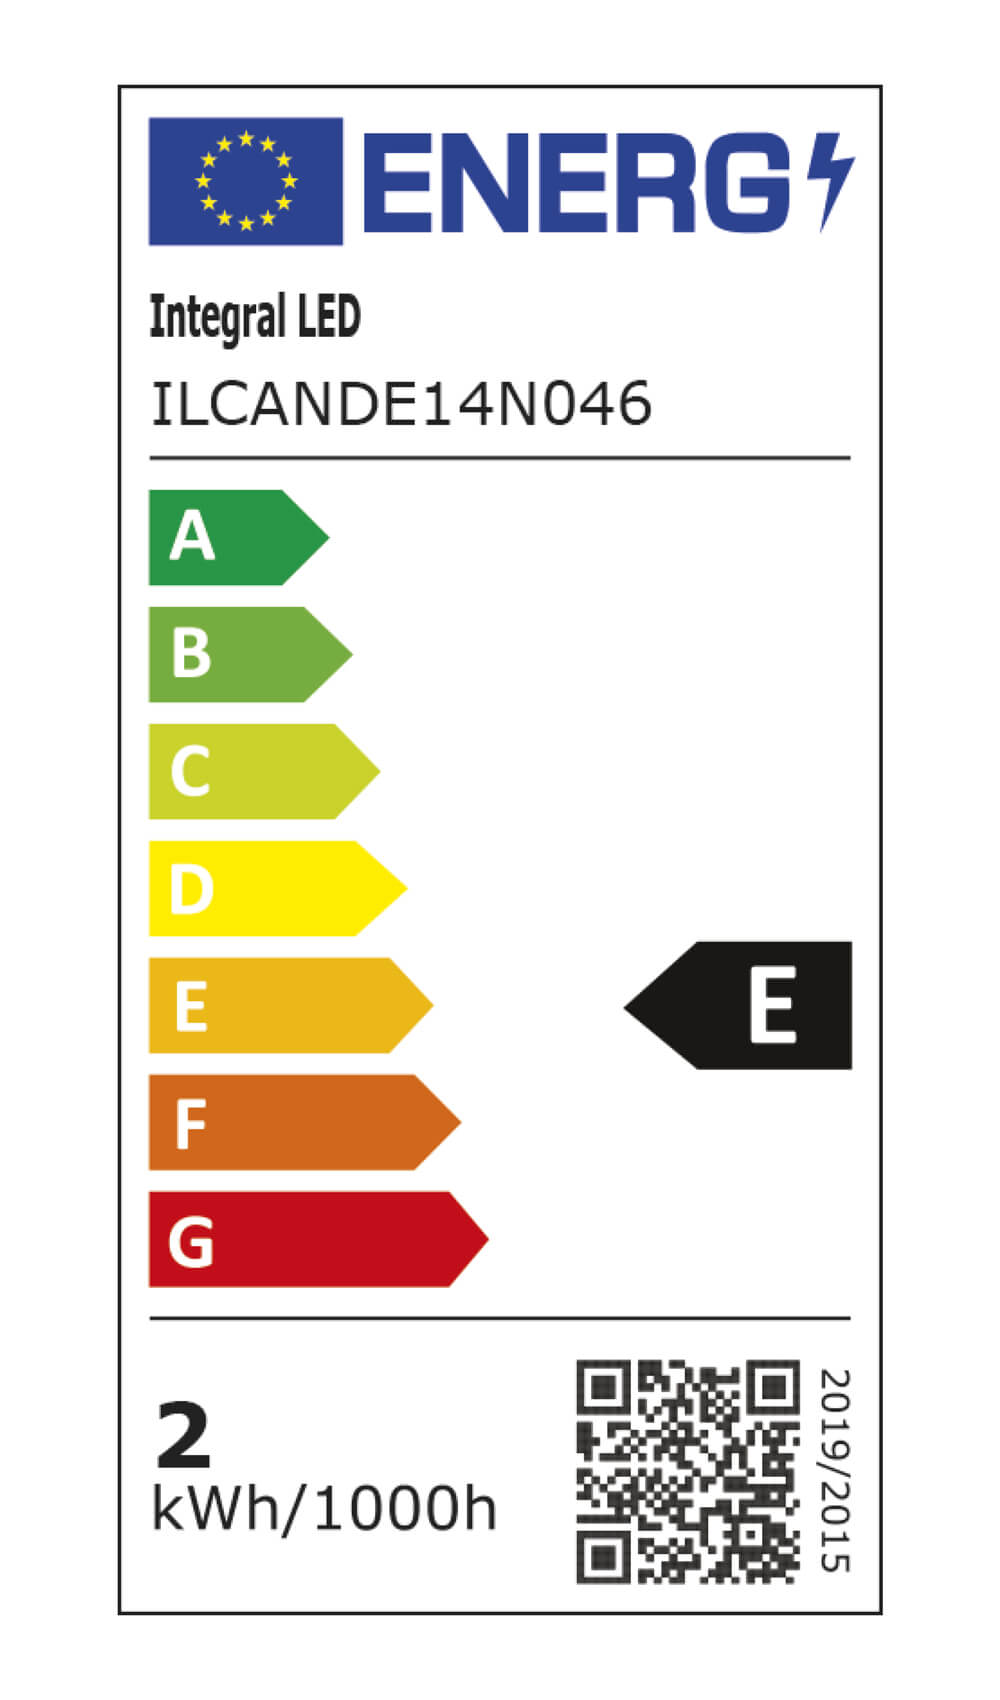 New-style energy rating label